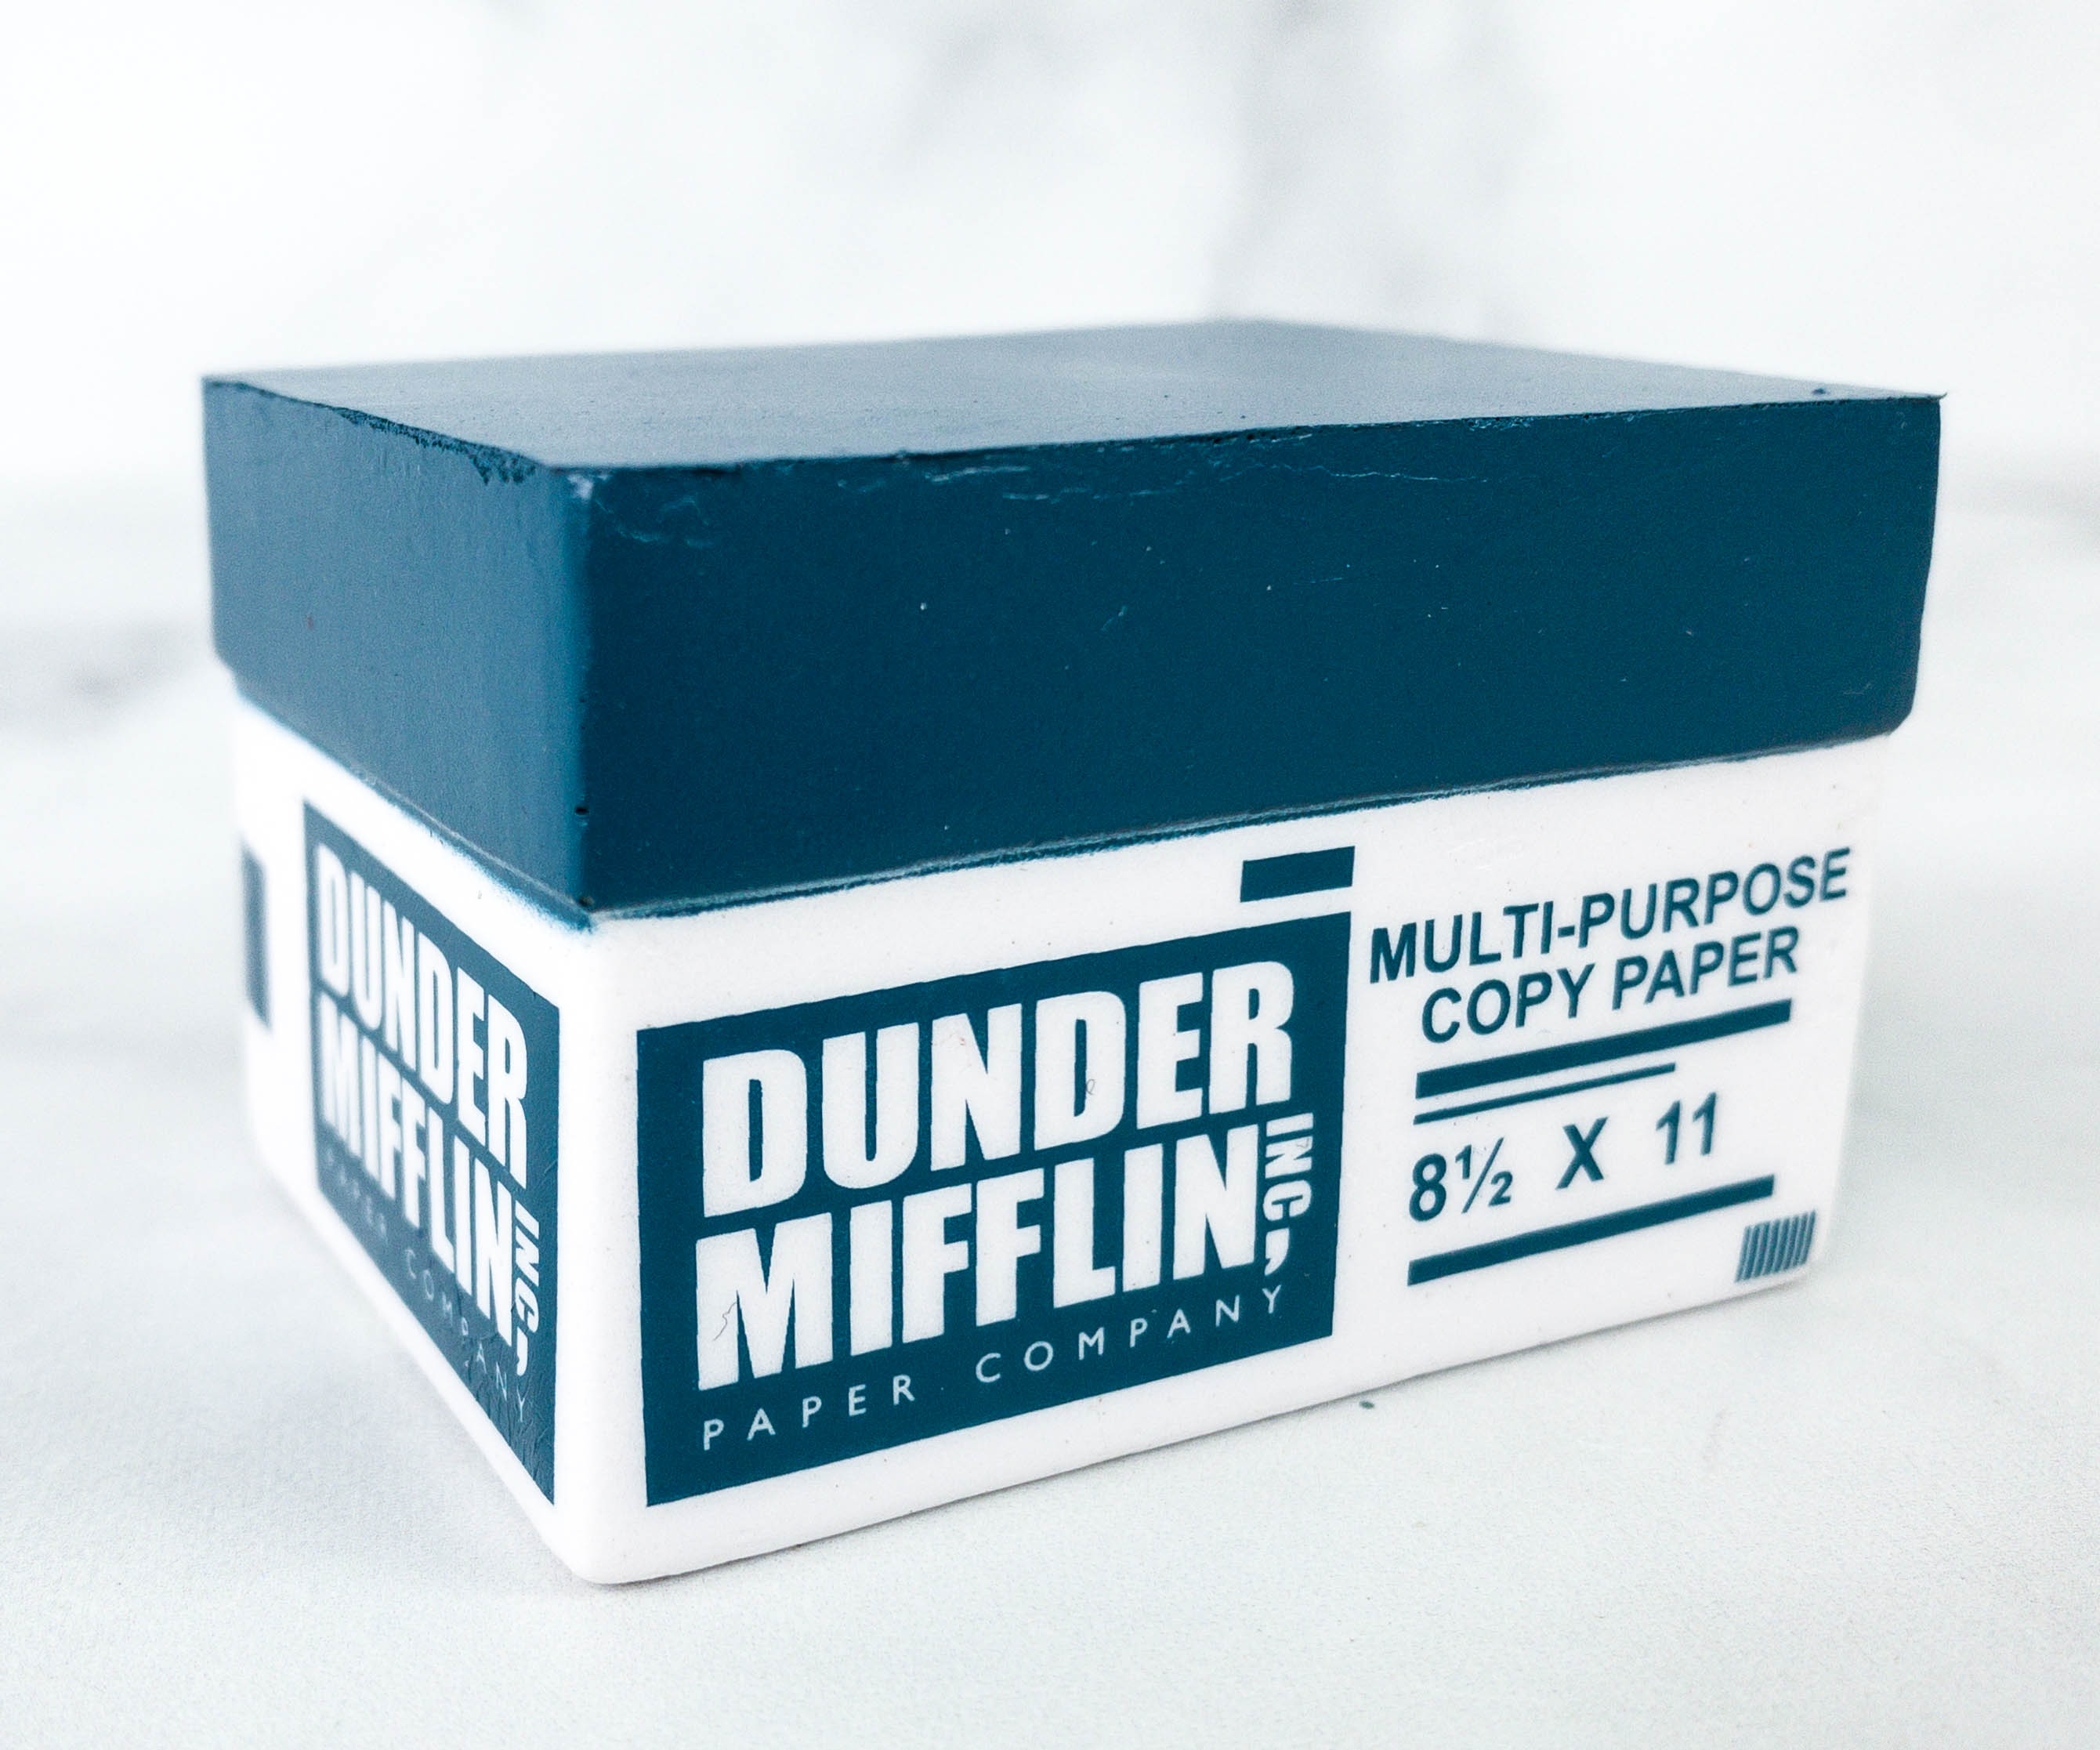 DESIGN: THE OFFICE-DUNDER MIFFLIN PAPER COMPANY, INC.